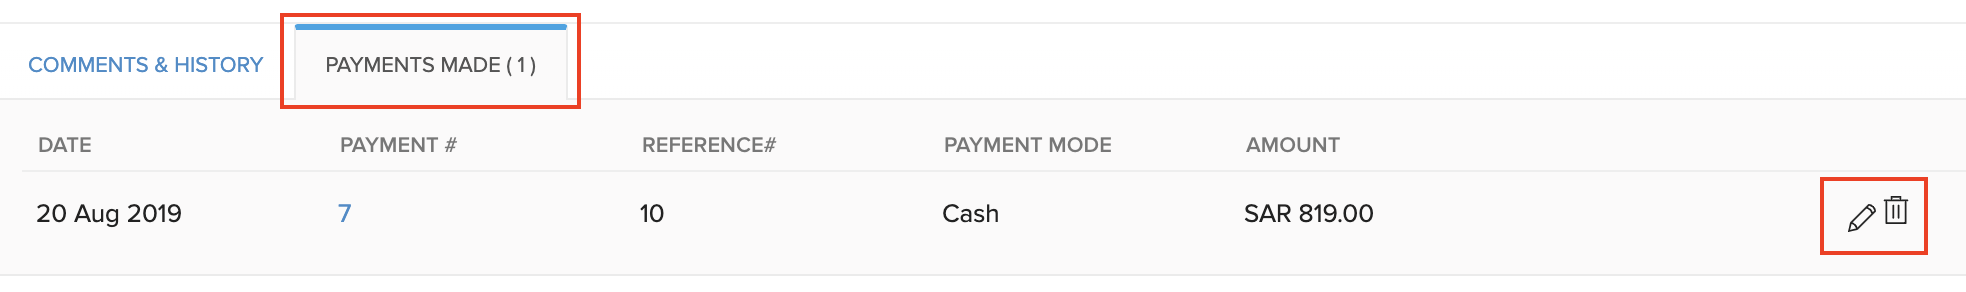 Payments Made Actions